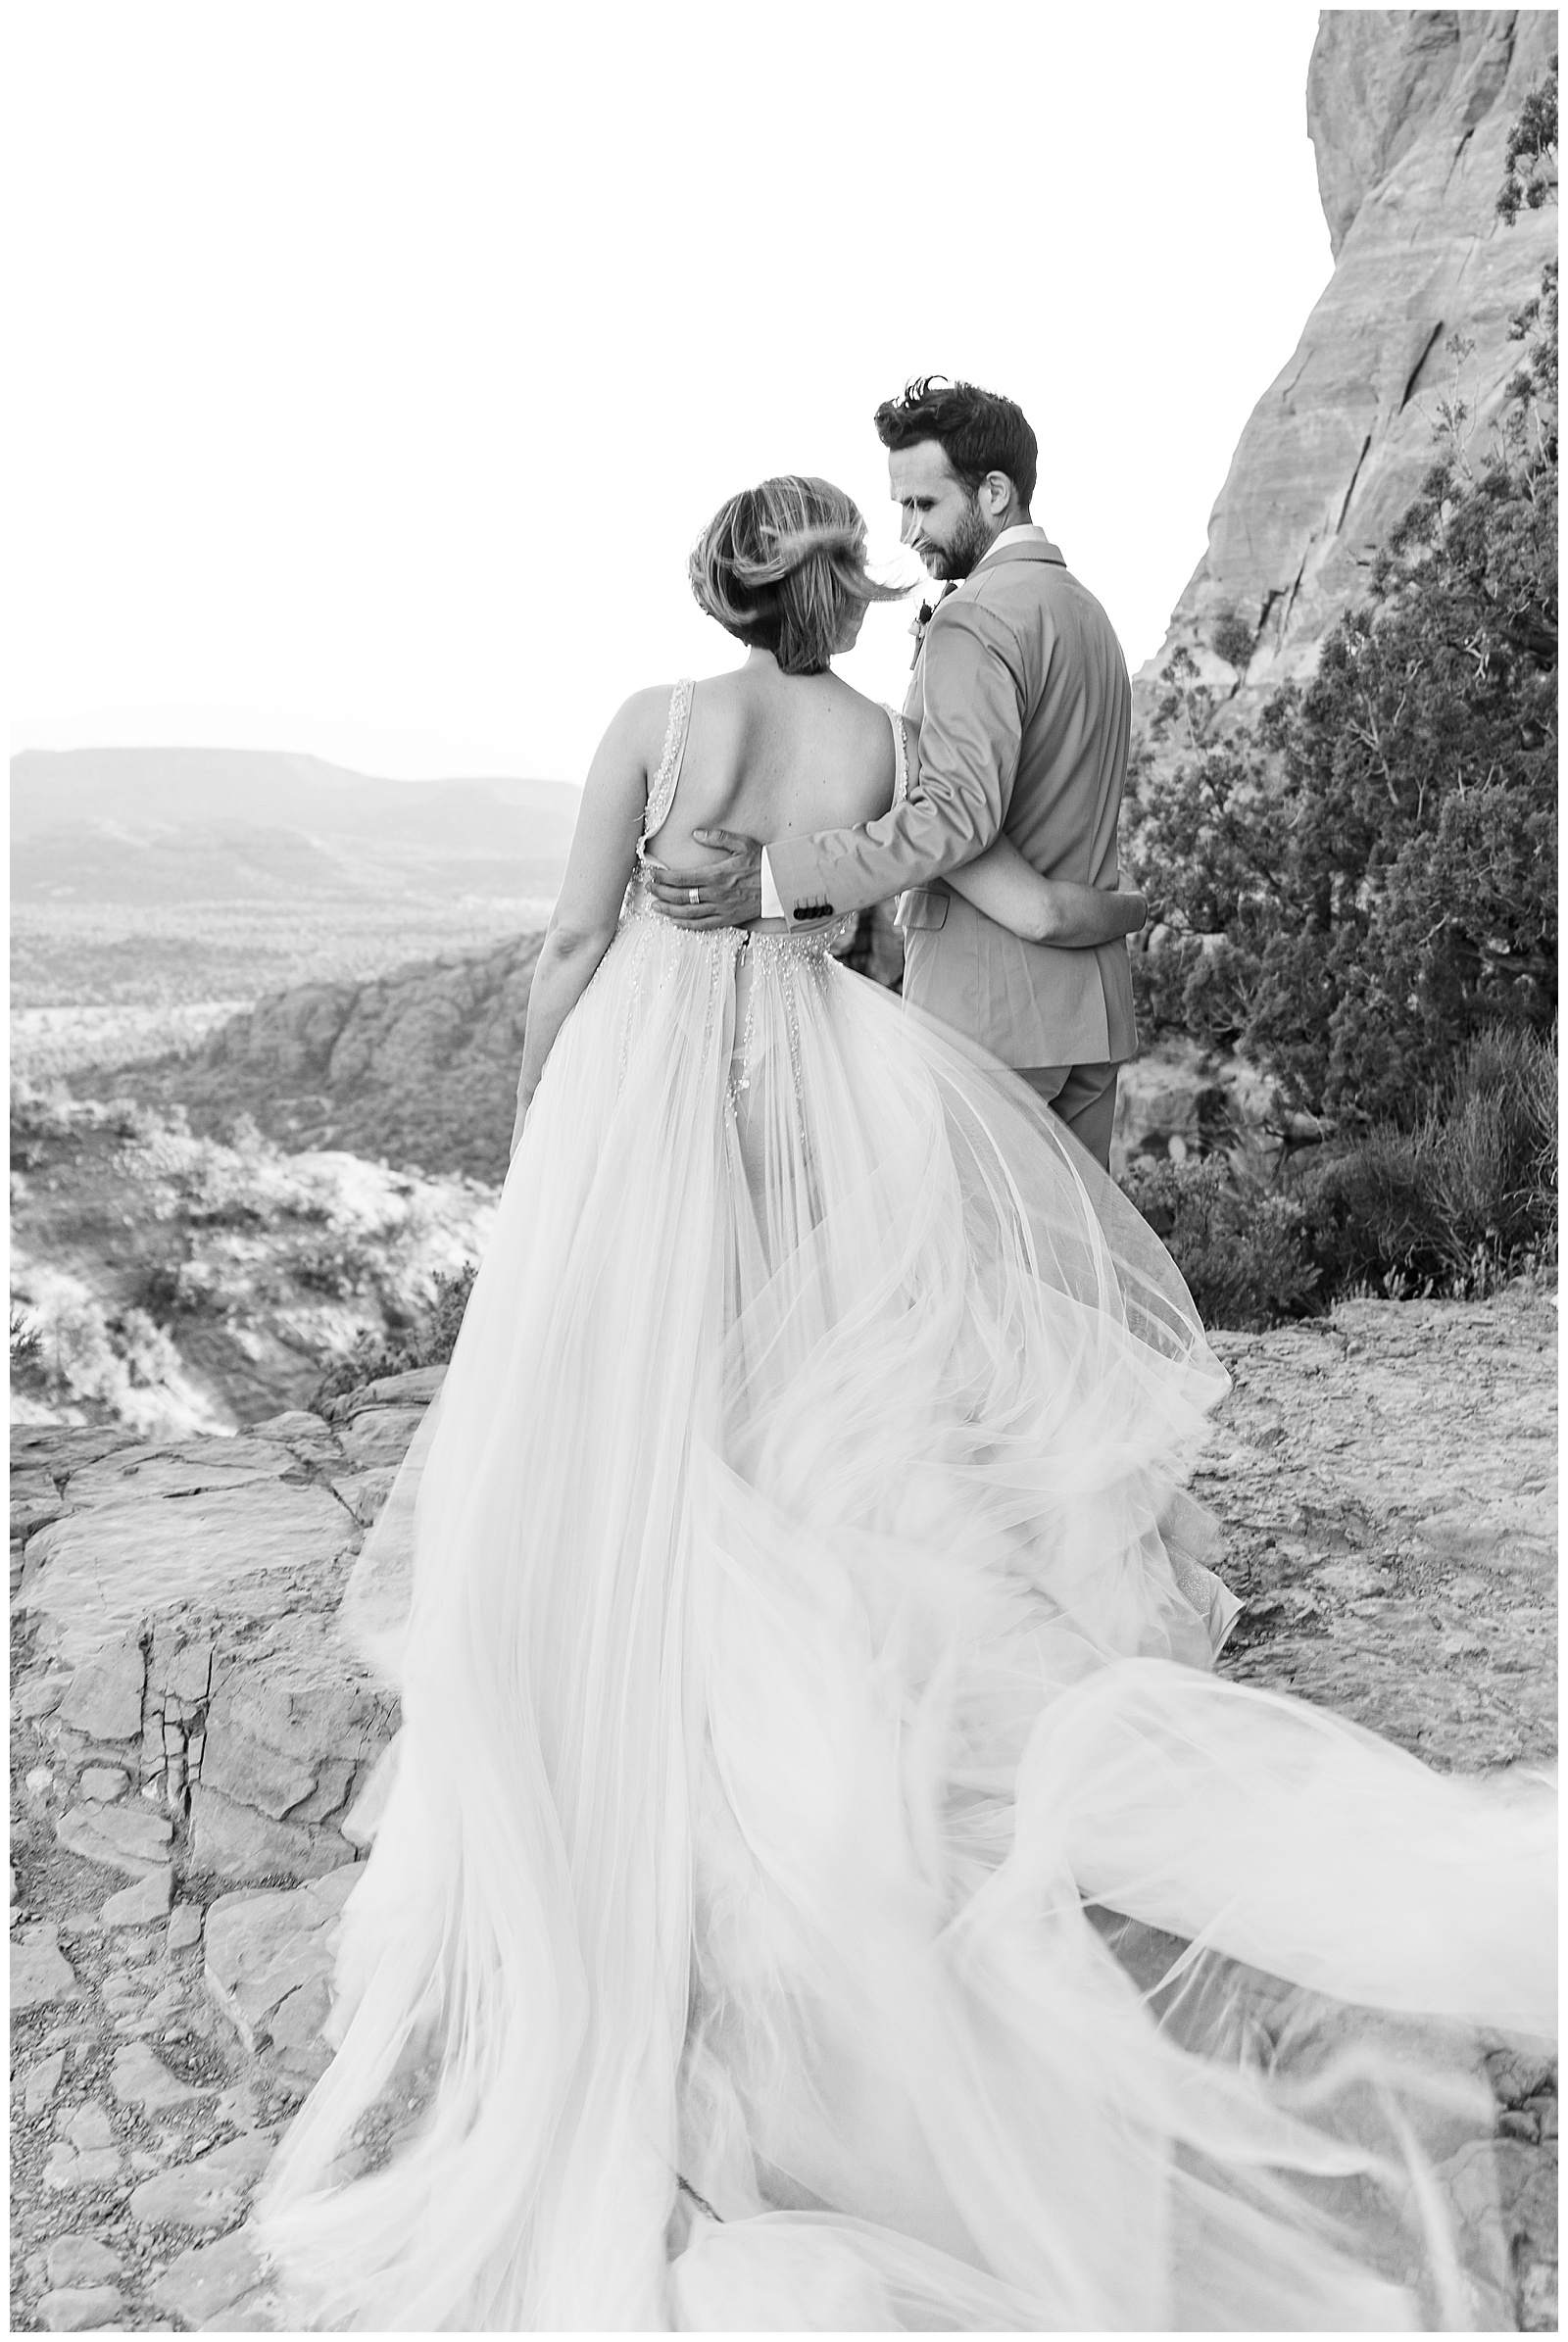 engagement photography sedona cathedral rock bhldn gown flowing in wind